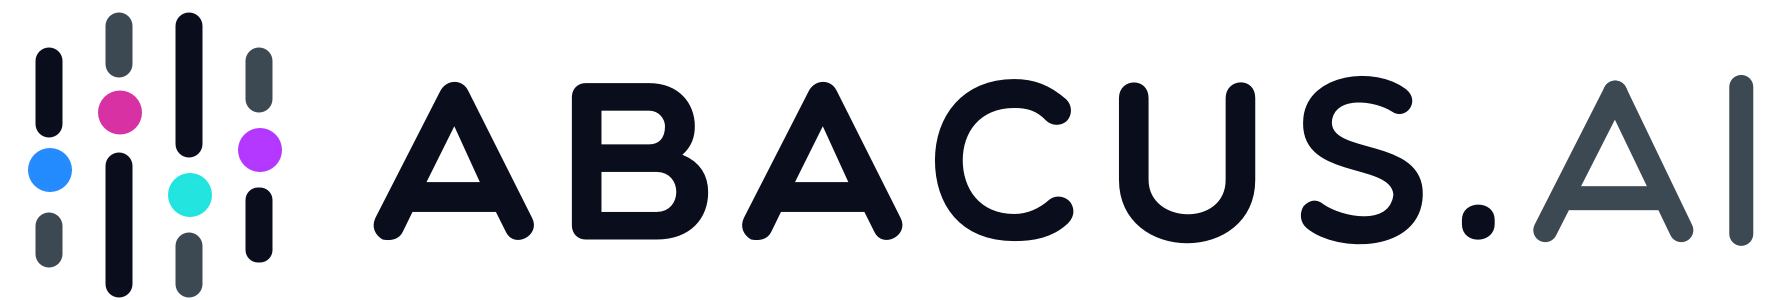 abacus logo.png